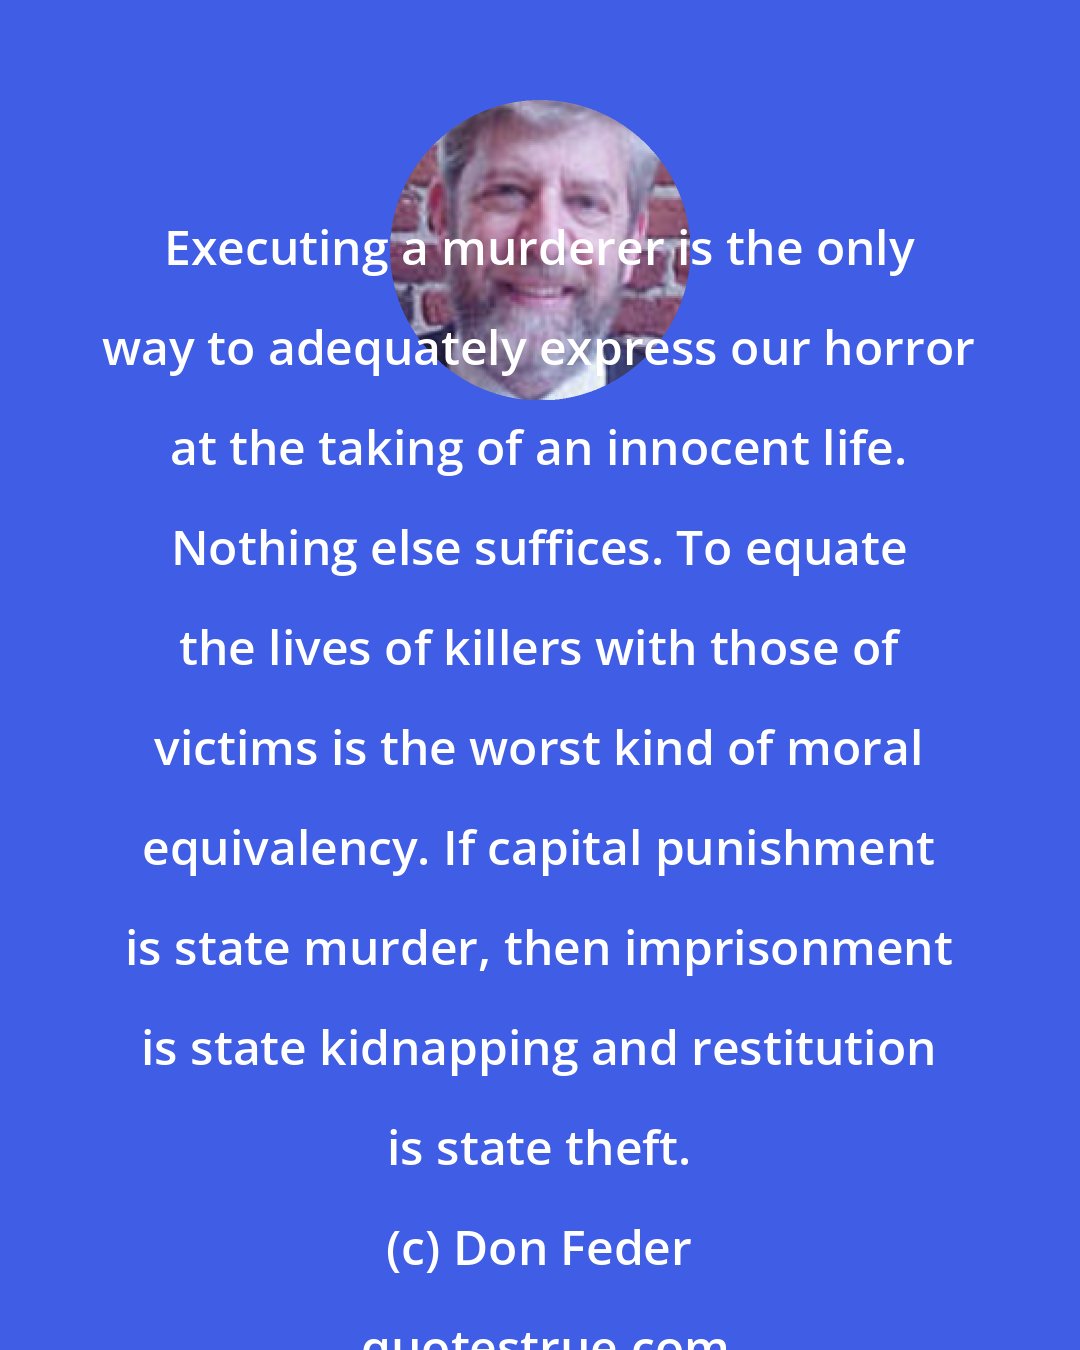 Don Feder: Executing a murderer is the only way to adequately express our horror at the taking of an innocent life. Nothing else suffices. To equate the lives of killers with those of victims is the worst kind of moral equivalency. If capital punishment is state murder, then imprisonment is state kidnapping and restitution is state theft.